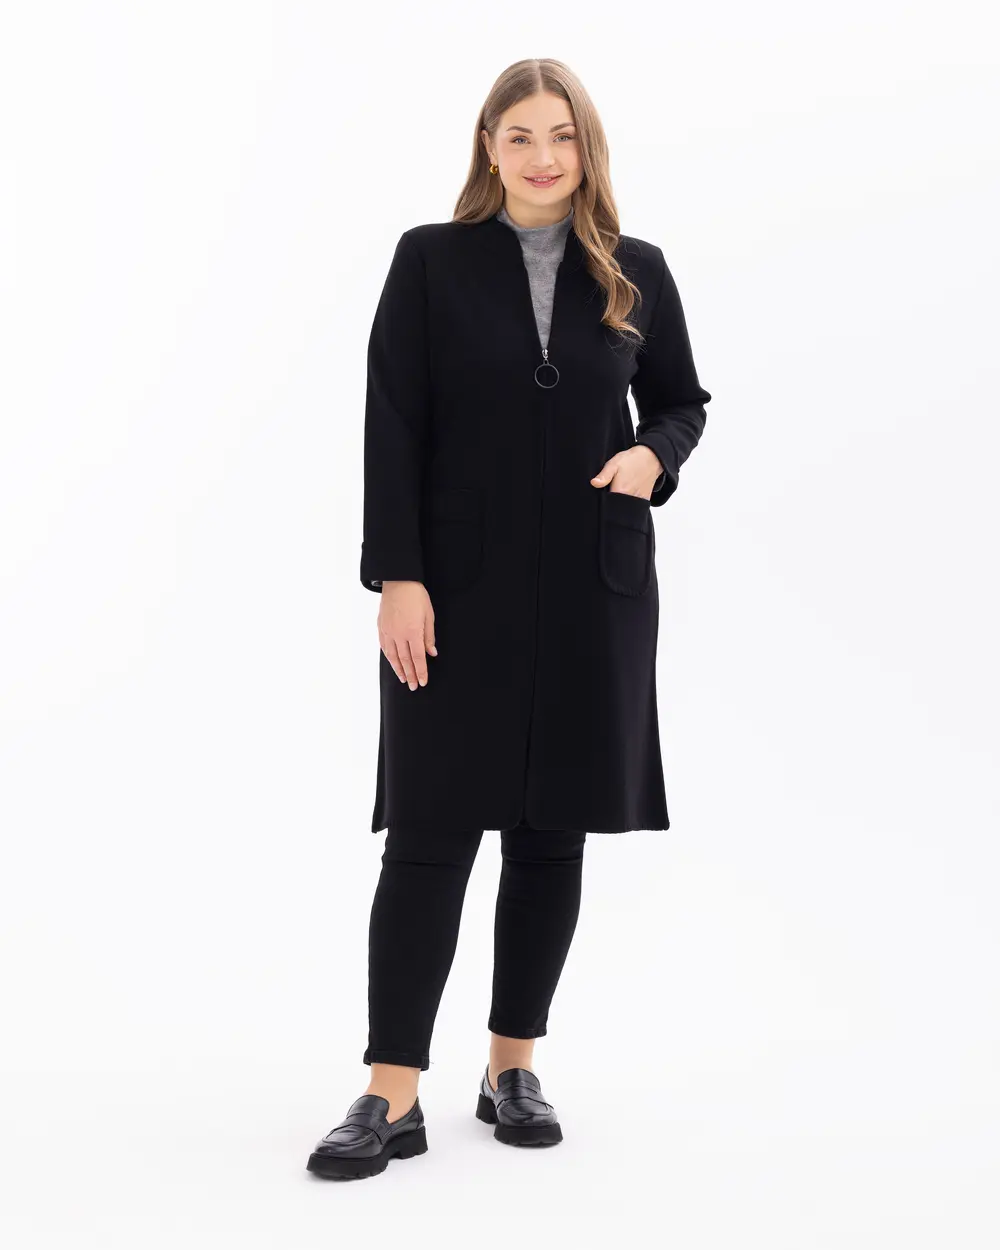 Plus Size Knee Length Knitted Cardigan with Zipper Pockets